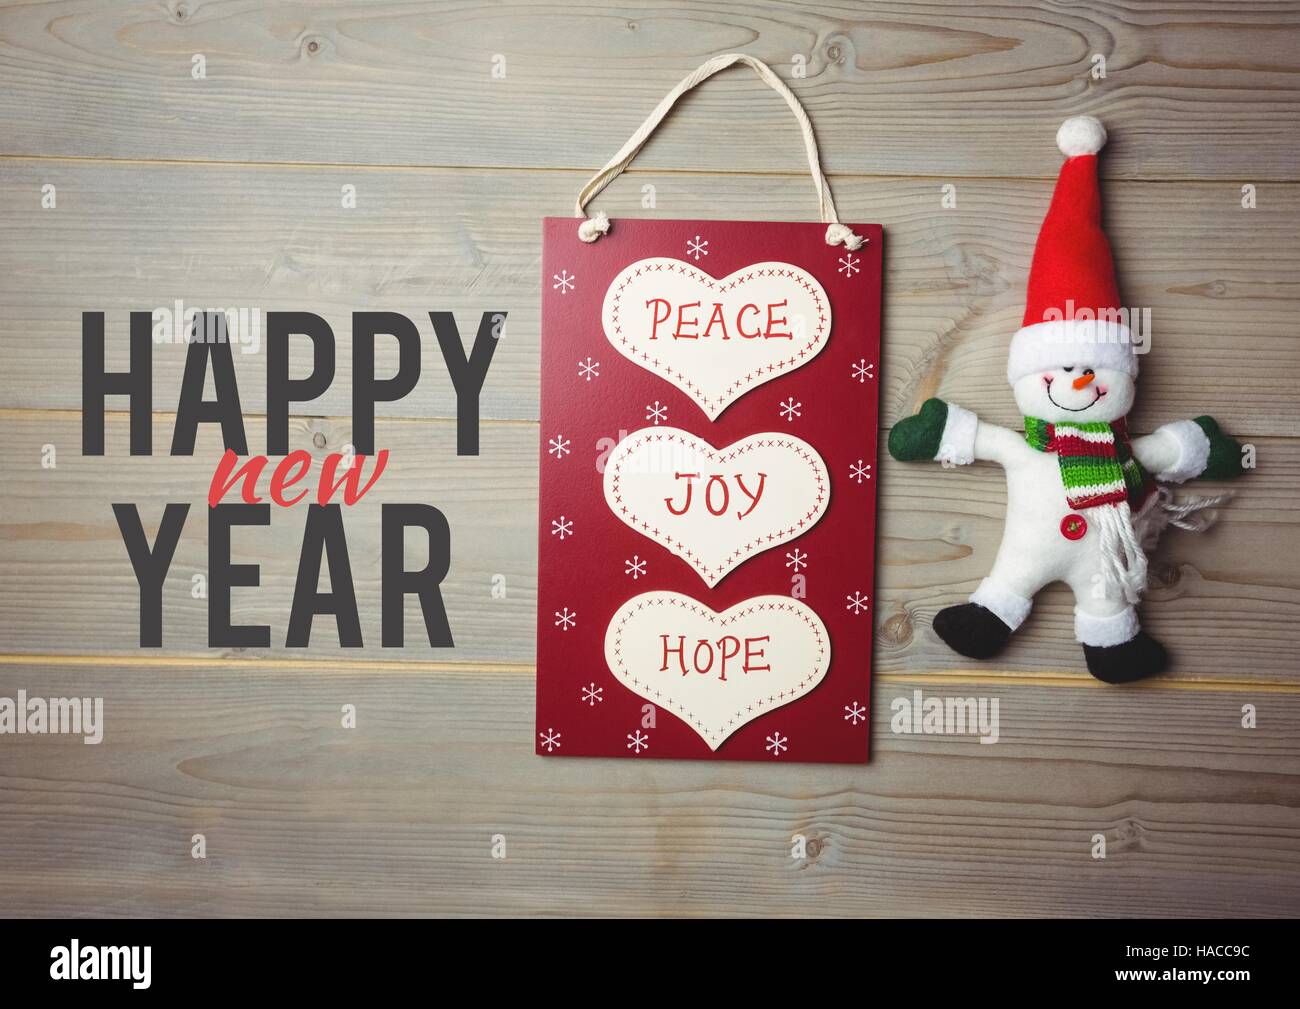 Happy christmas message on wooden background with shopping bag and snowman Stock Photo